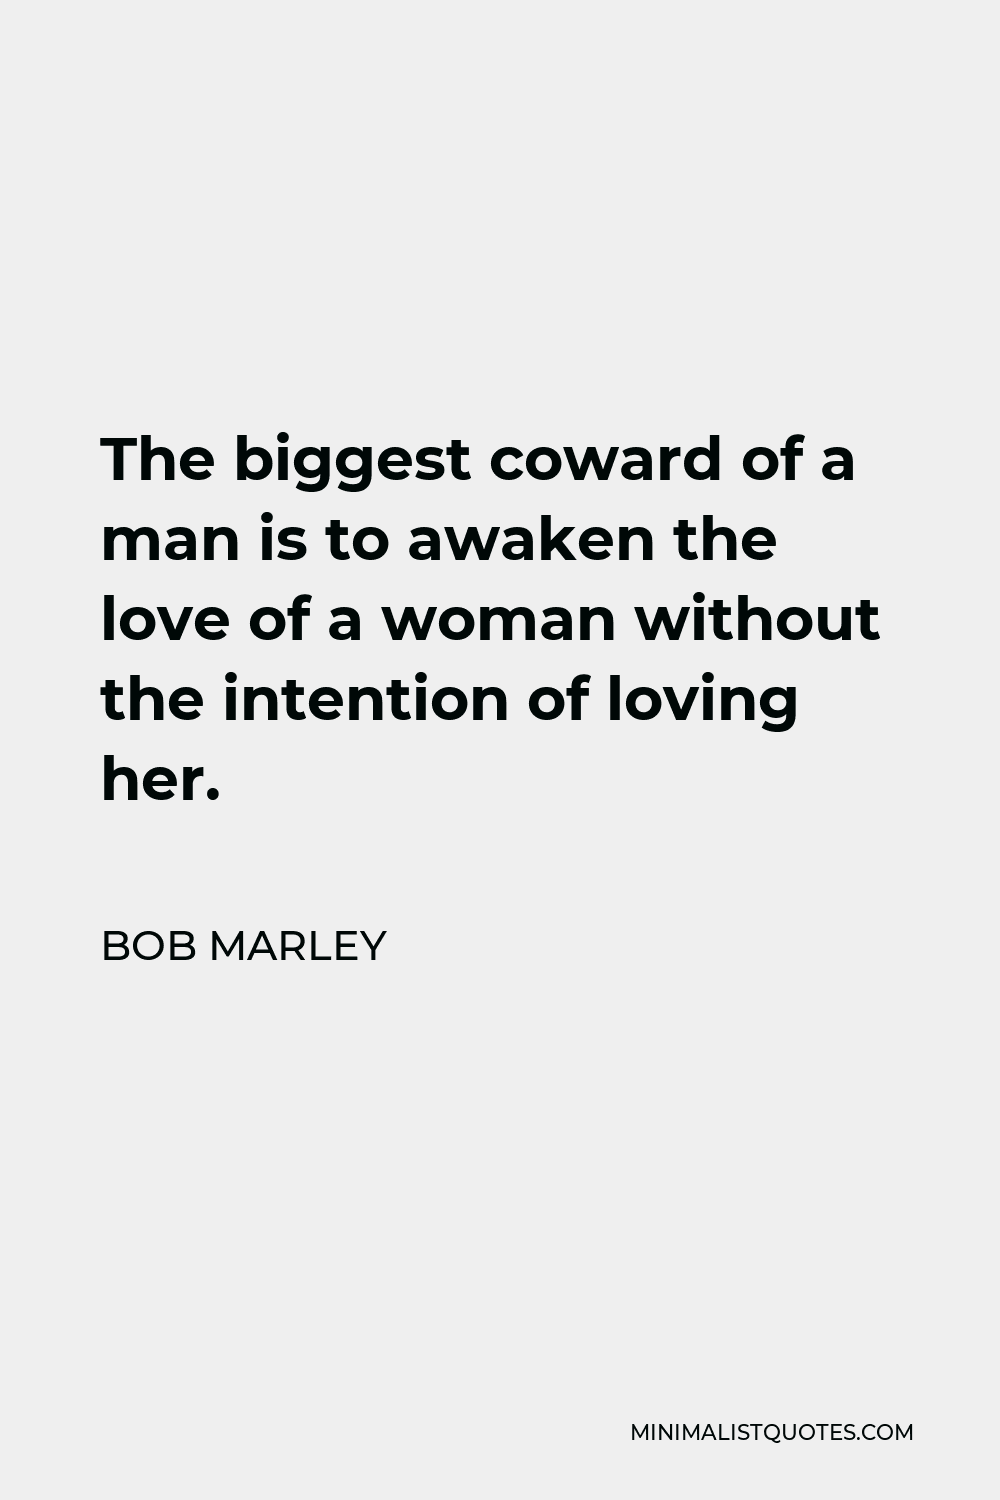 Bob Marley Quote - The biggest coward of a man is to awaken the love of a woman without the intention of loving her.